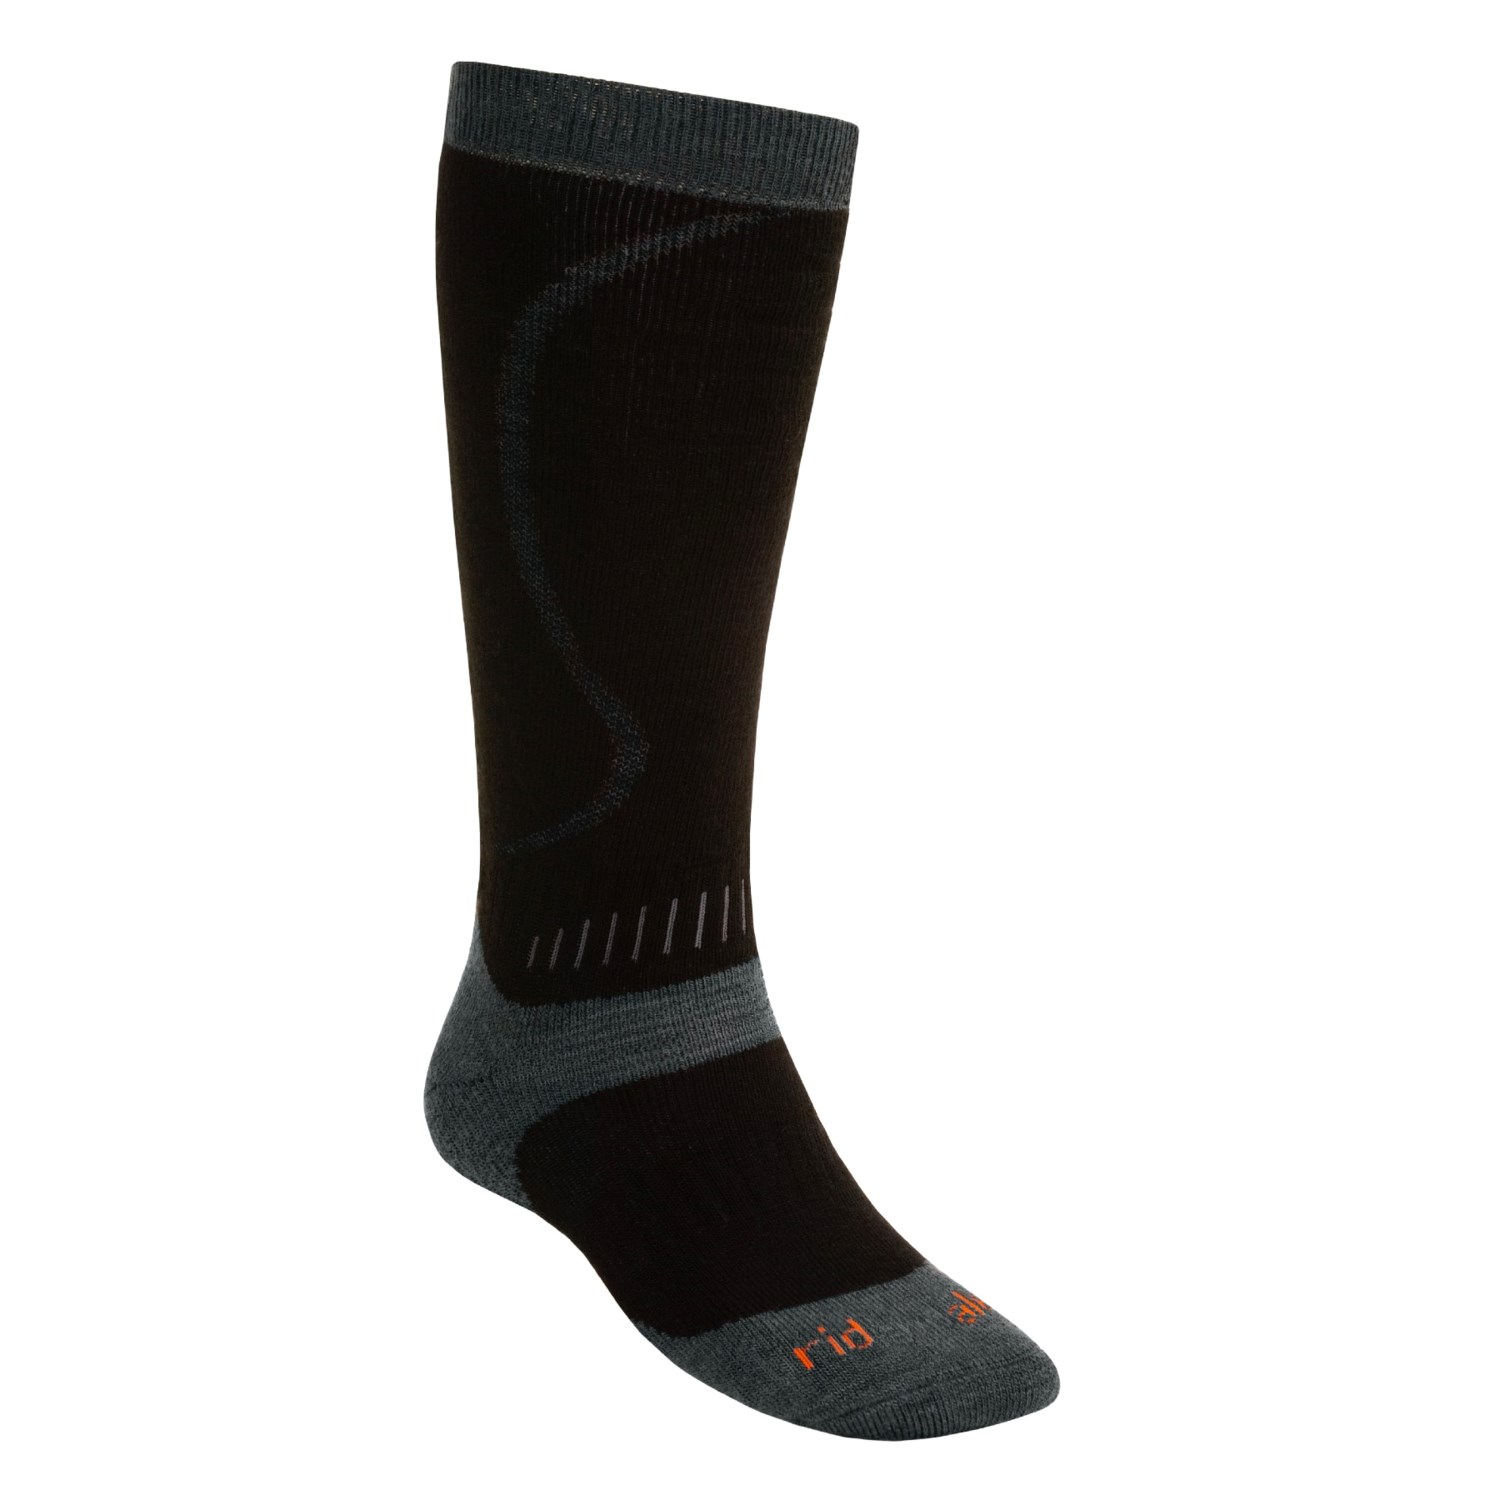  All Mountain Snow Sport Socks For Men and Women in Black / Charcoal